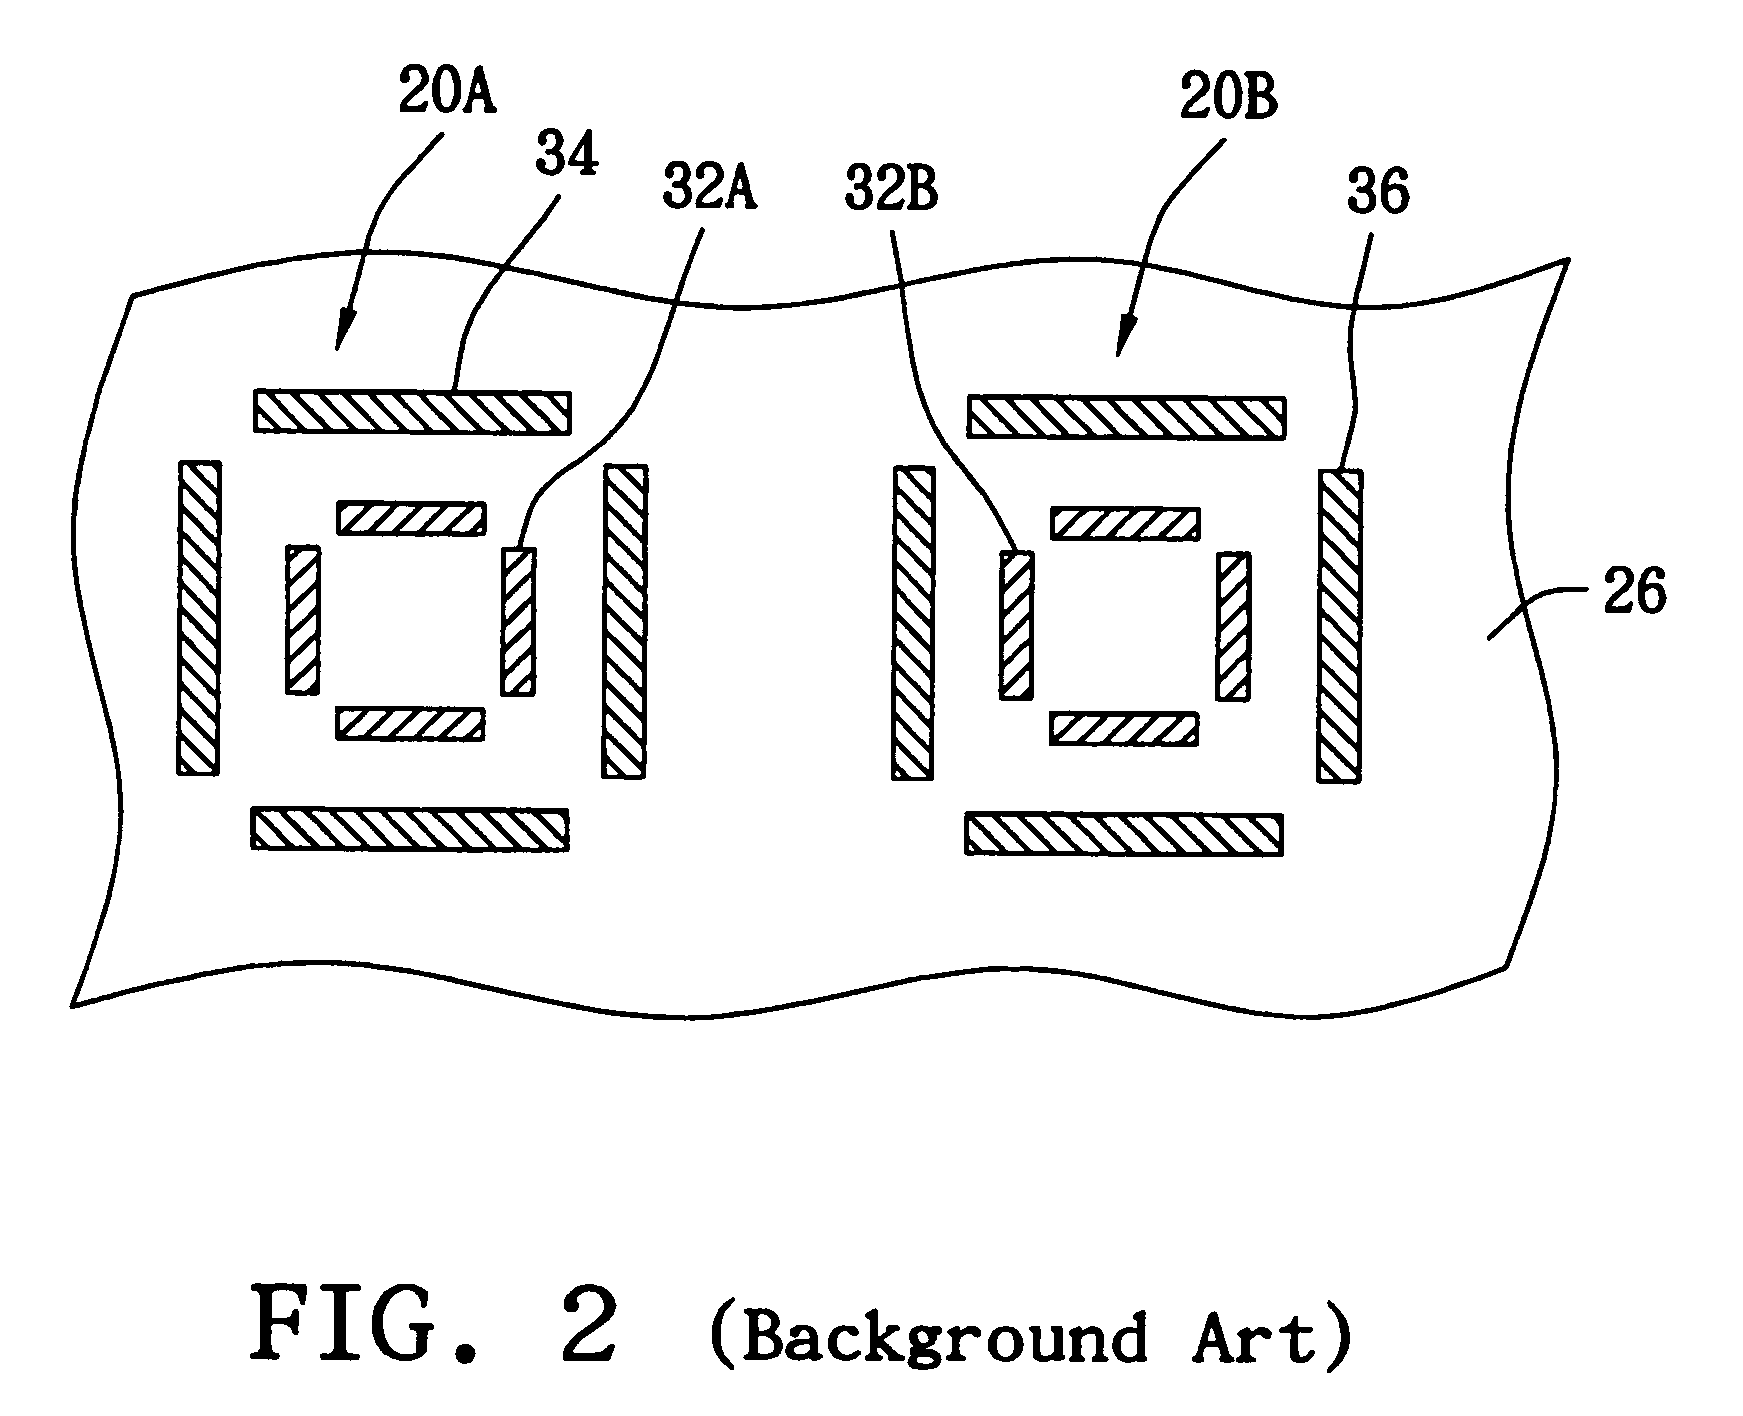 Overlay mark for aligning different layers on a semiconductor wafer